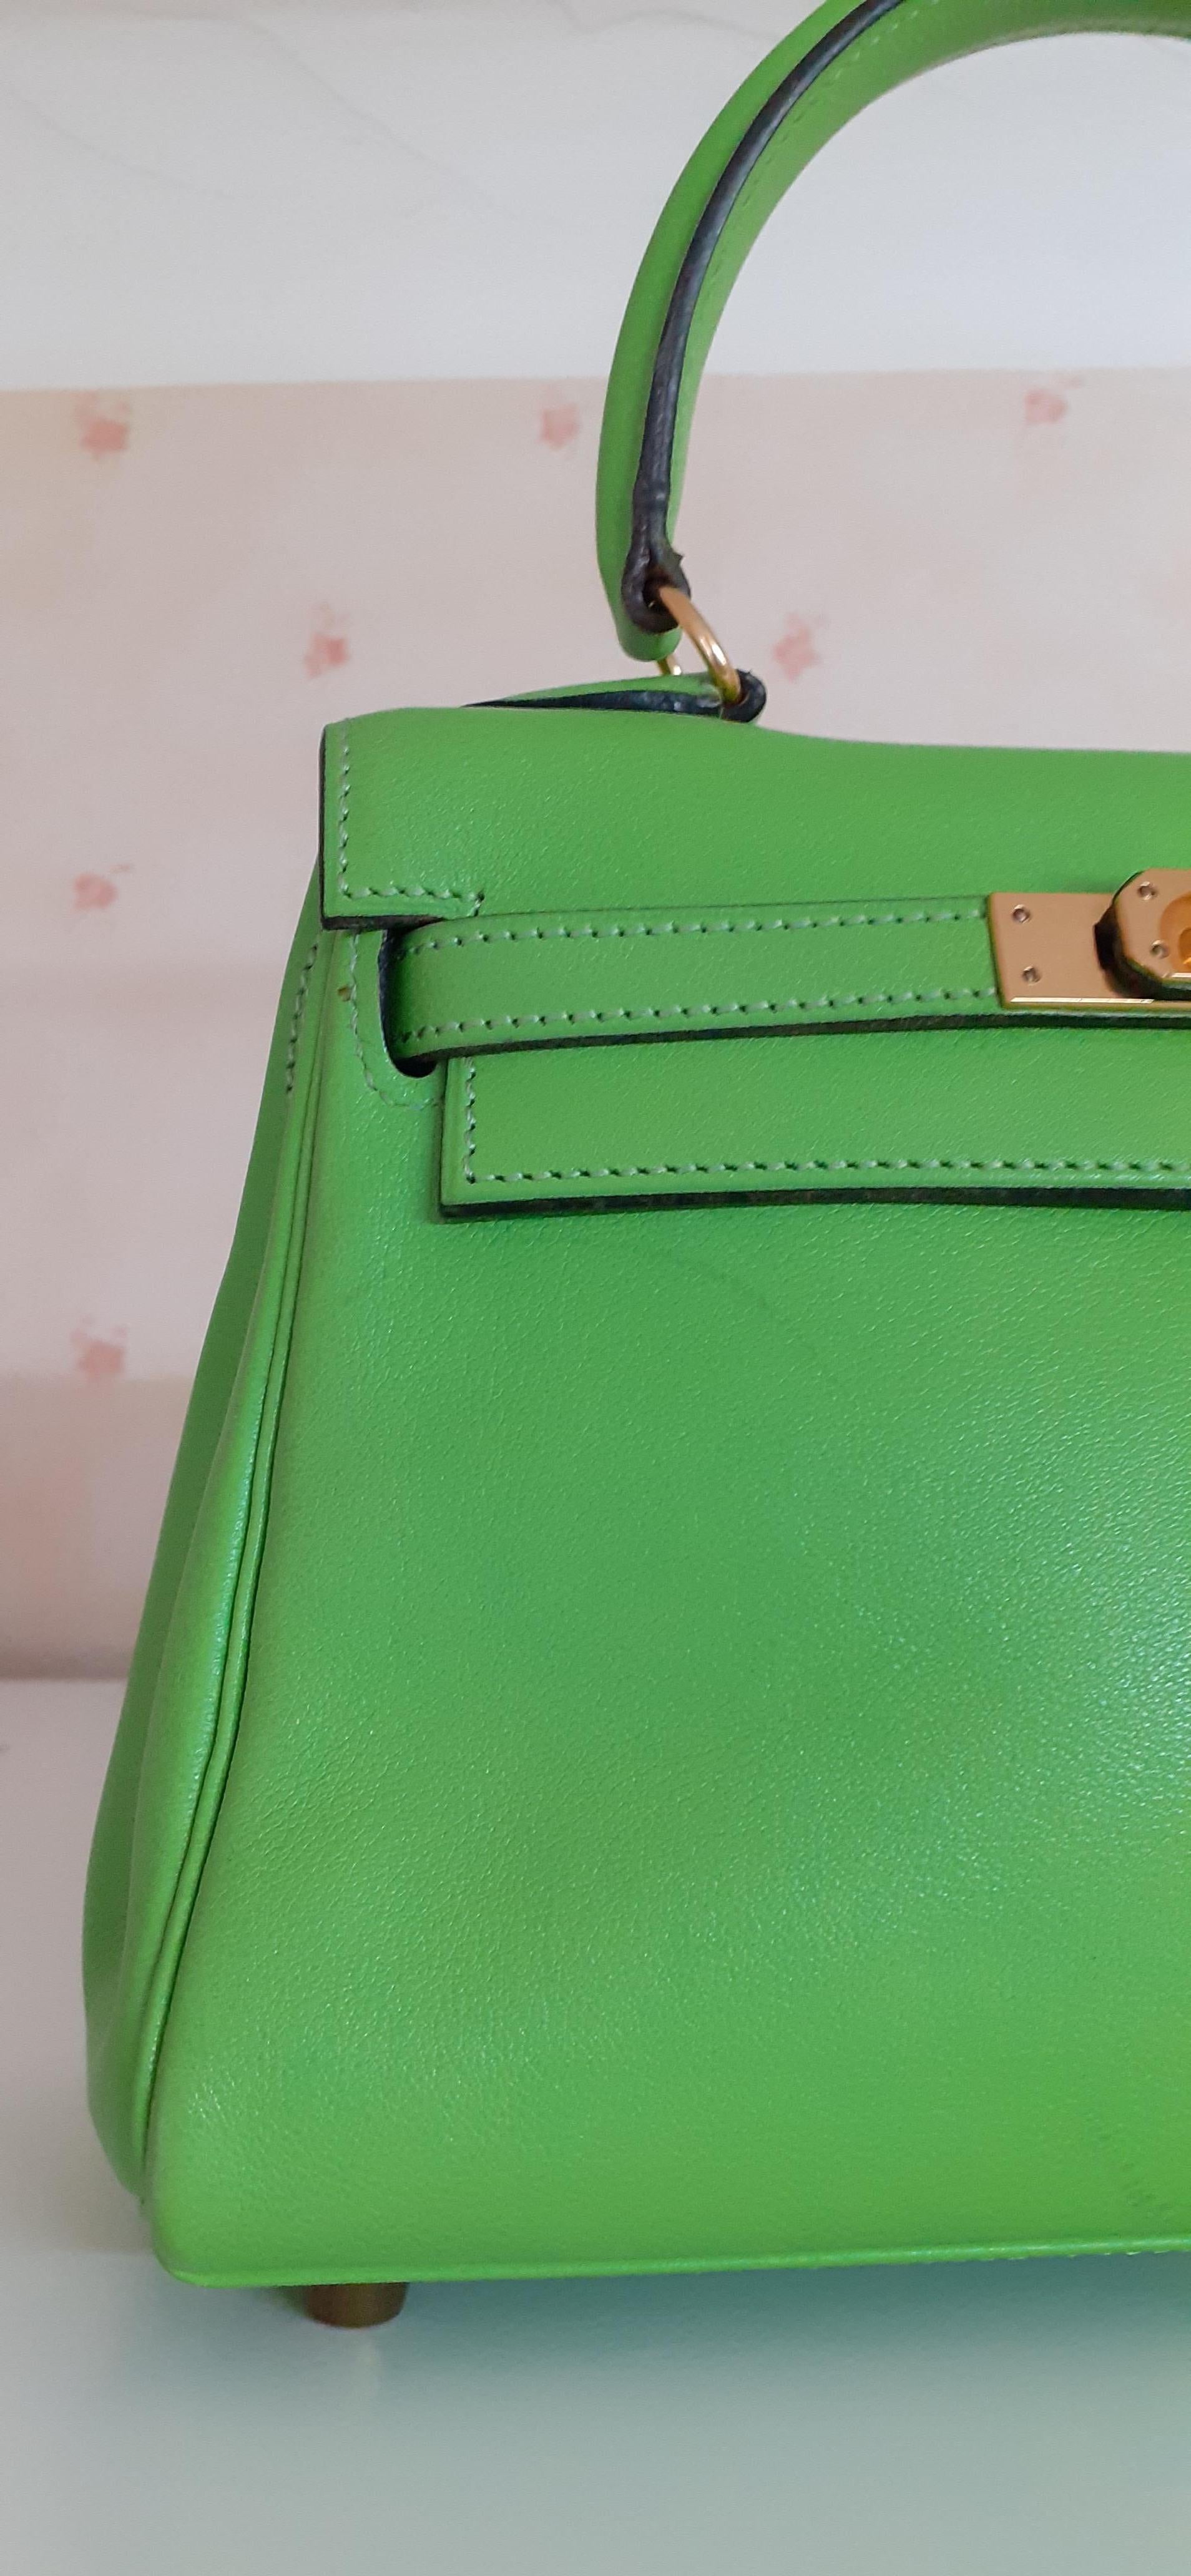 Extremely Rare Authentic Hermès Bag

